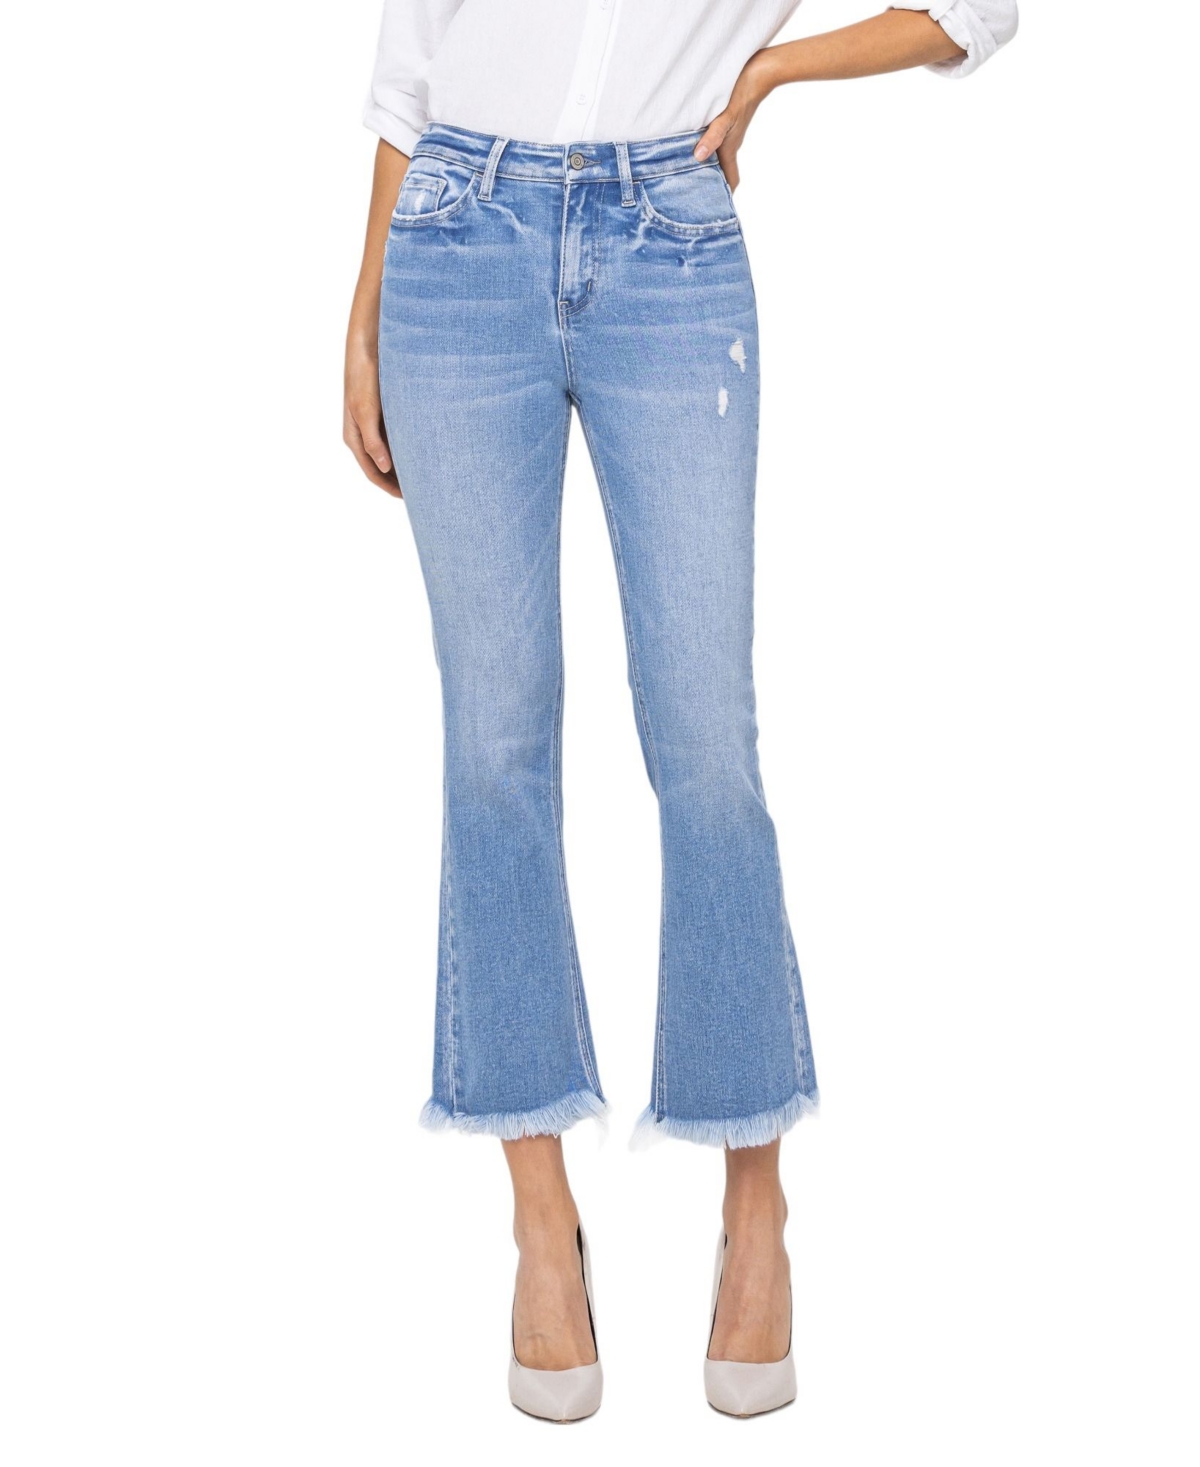 Women's High Rise Cropped Kick Flare Jeans - Beckons blue